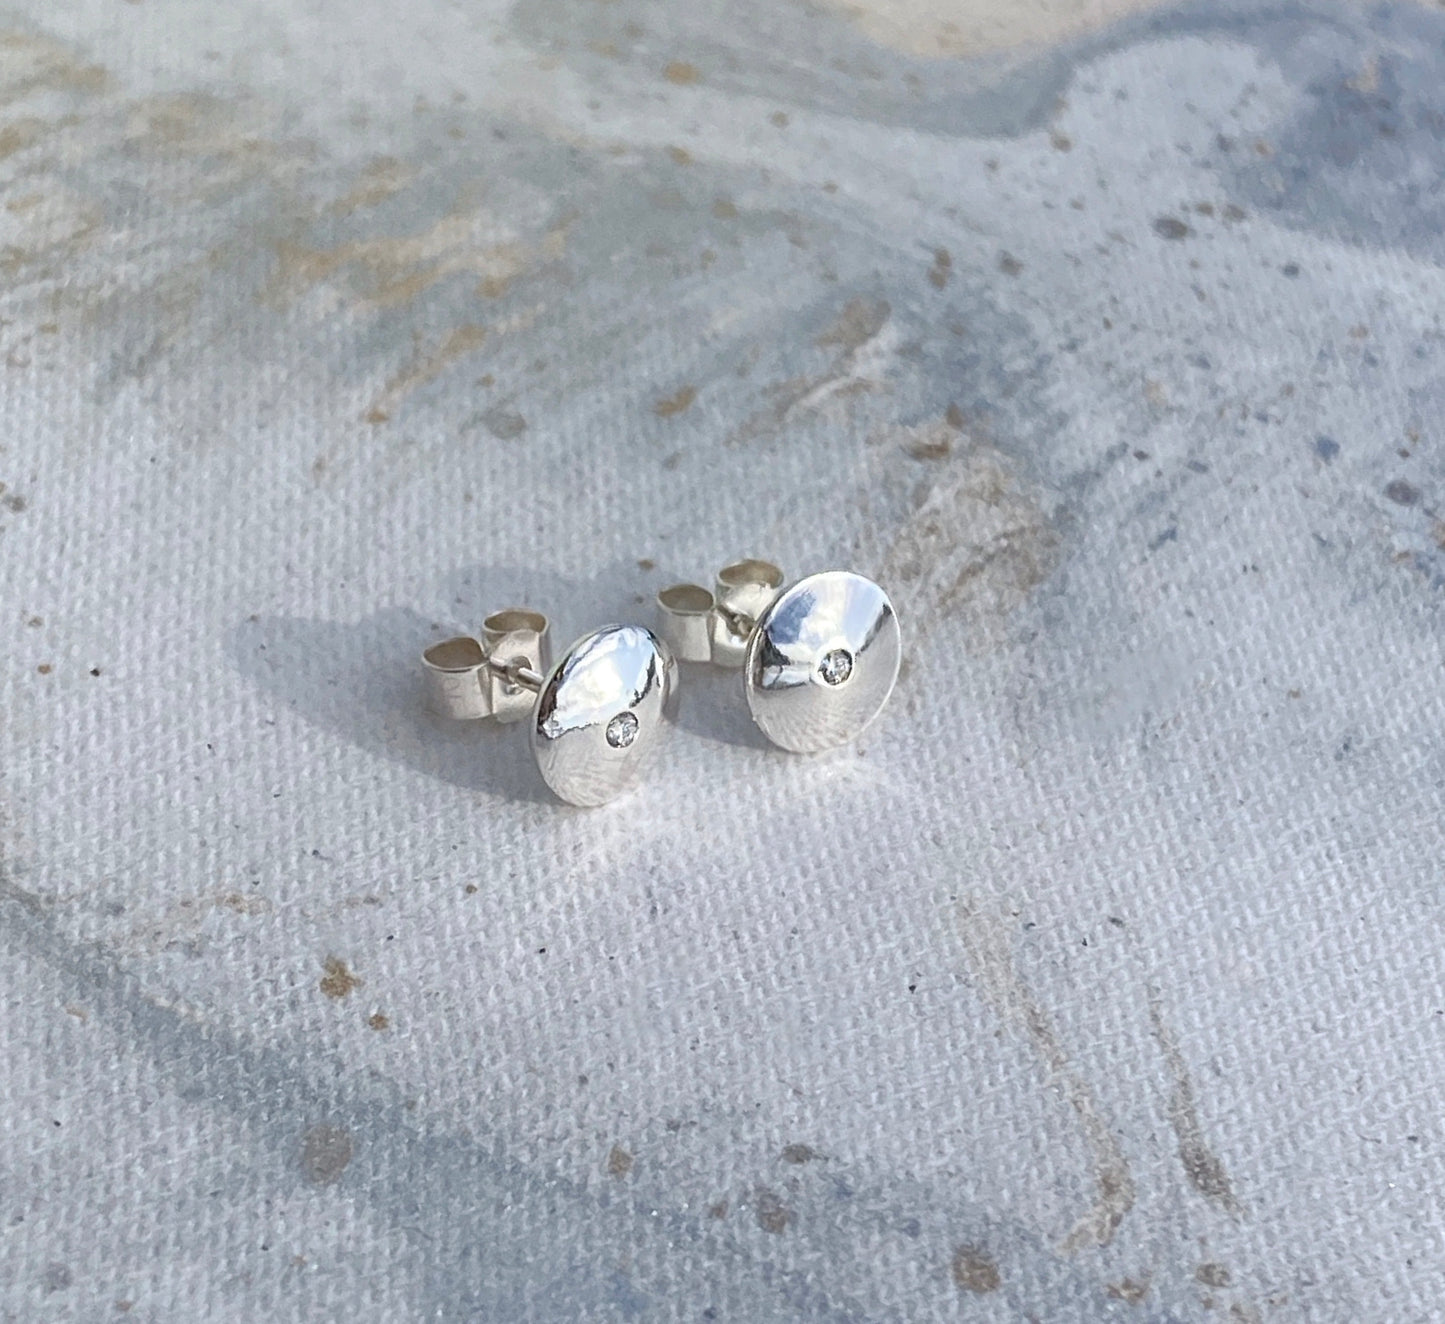 Domed silver earrings with diamonds.